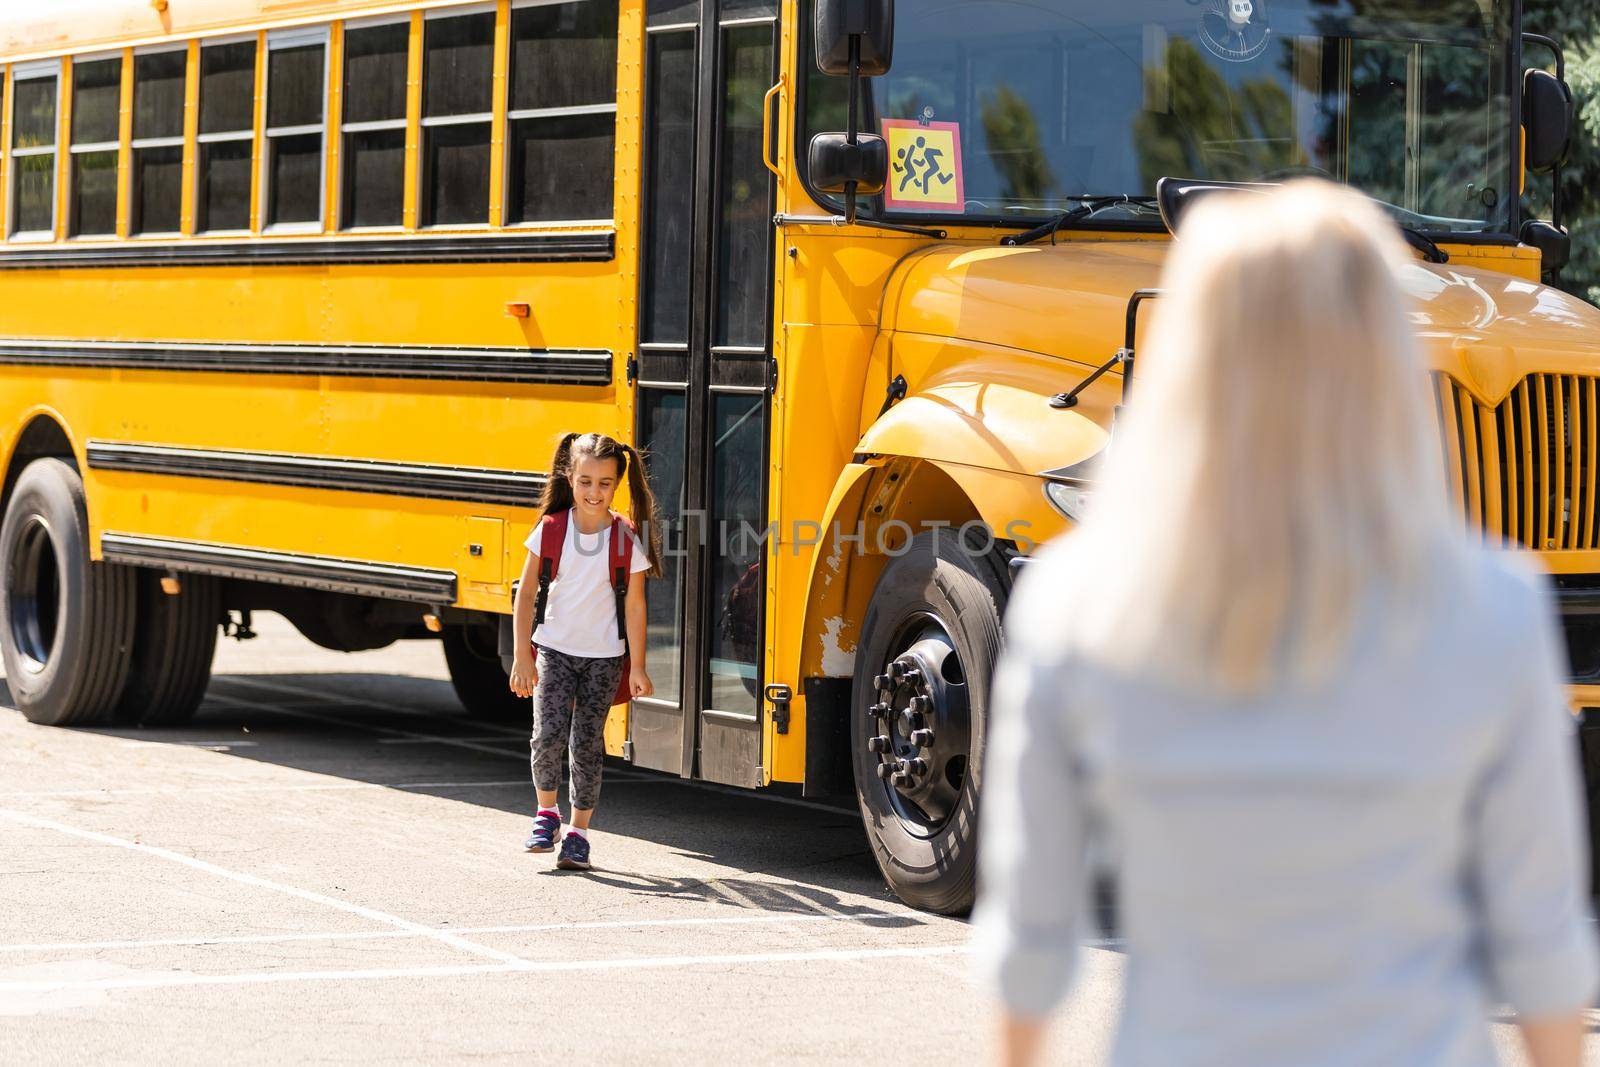 Mother brings her daughter to school near the school bus. back to school